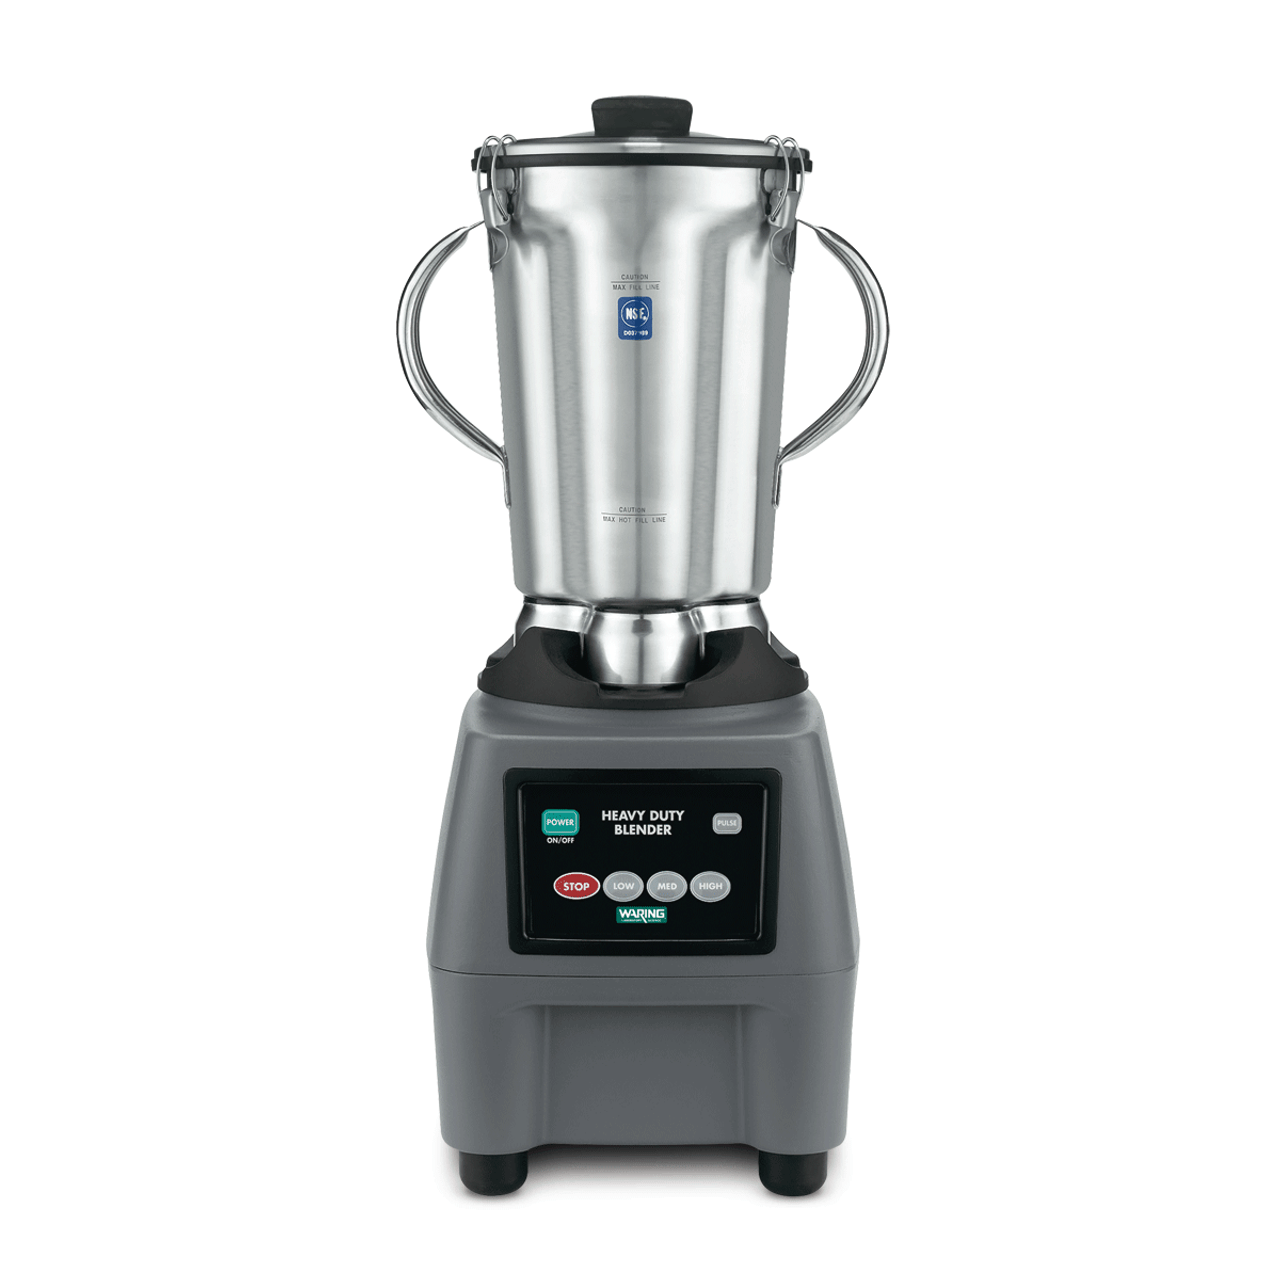 WARING 700S 1Lt Single-Speed Blender with Stainless Steel Container, 120V -  S5180-1 - General Laboratory Supply